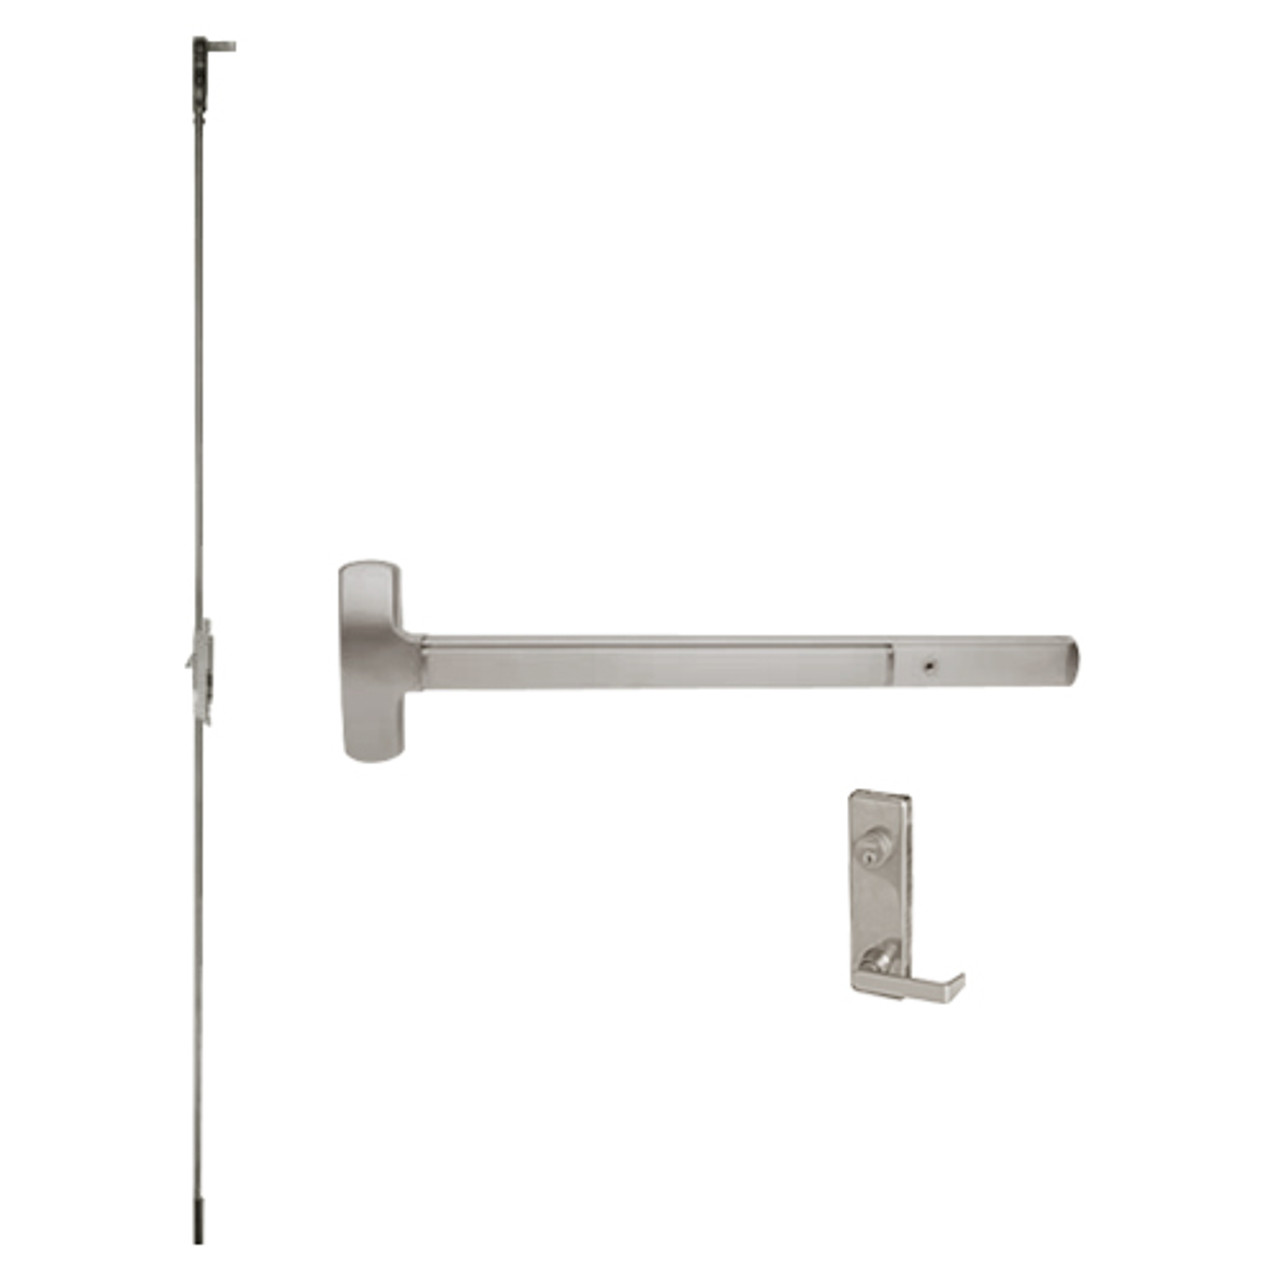 25-C-L-DANE-US32D-2-LHR Falcon Exit Device in Satin Stainless Steel